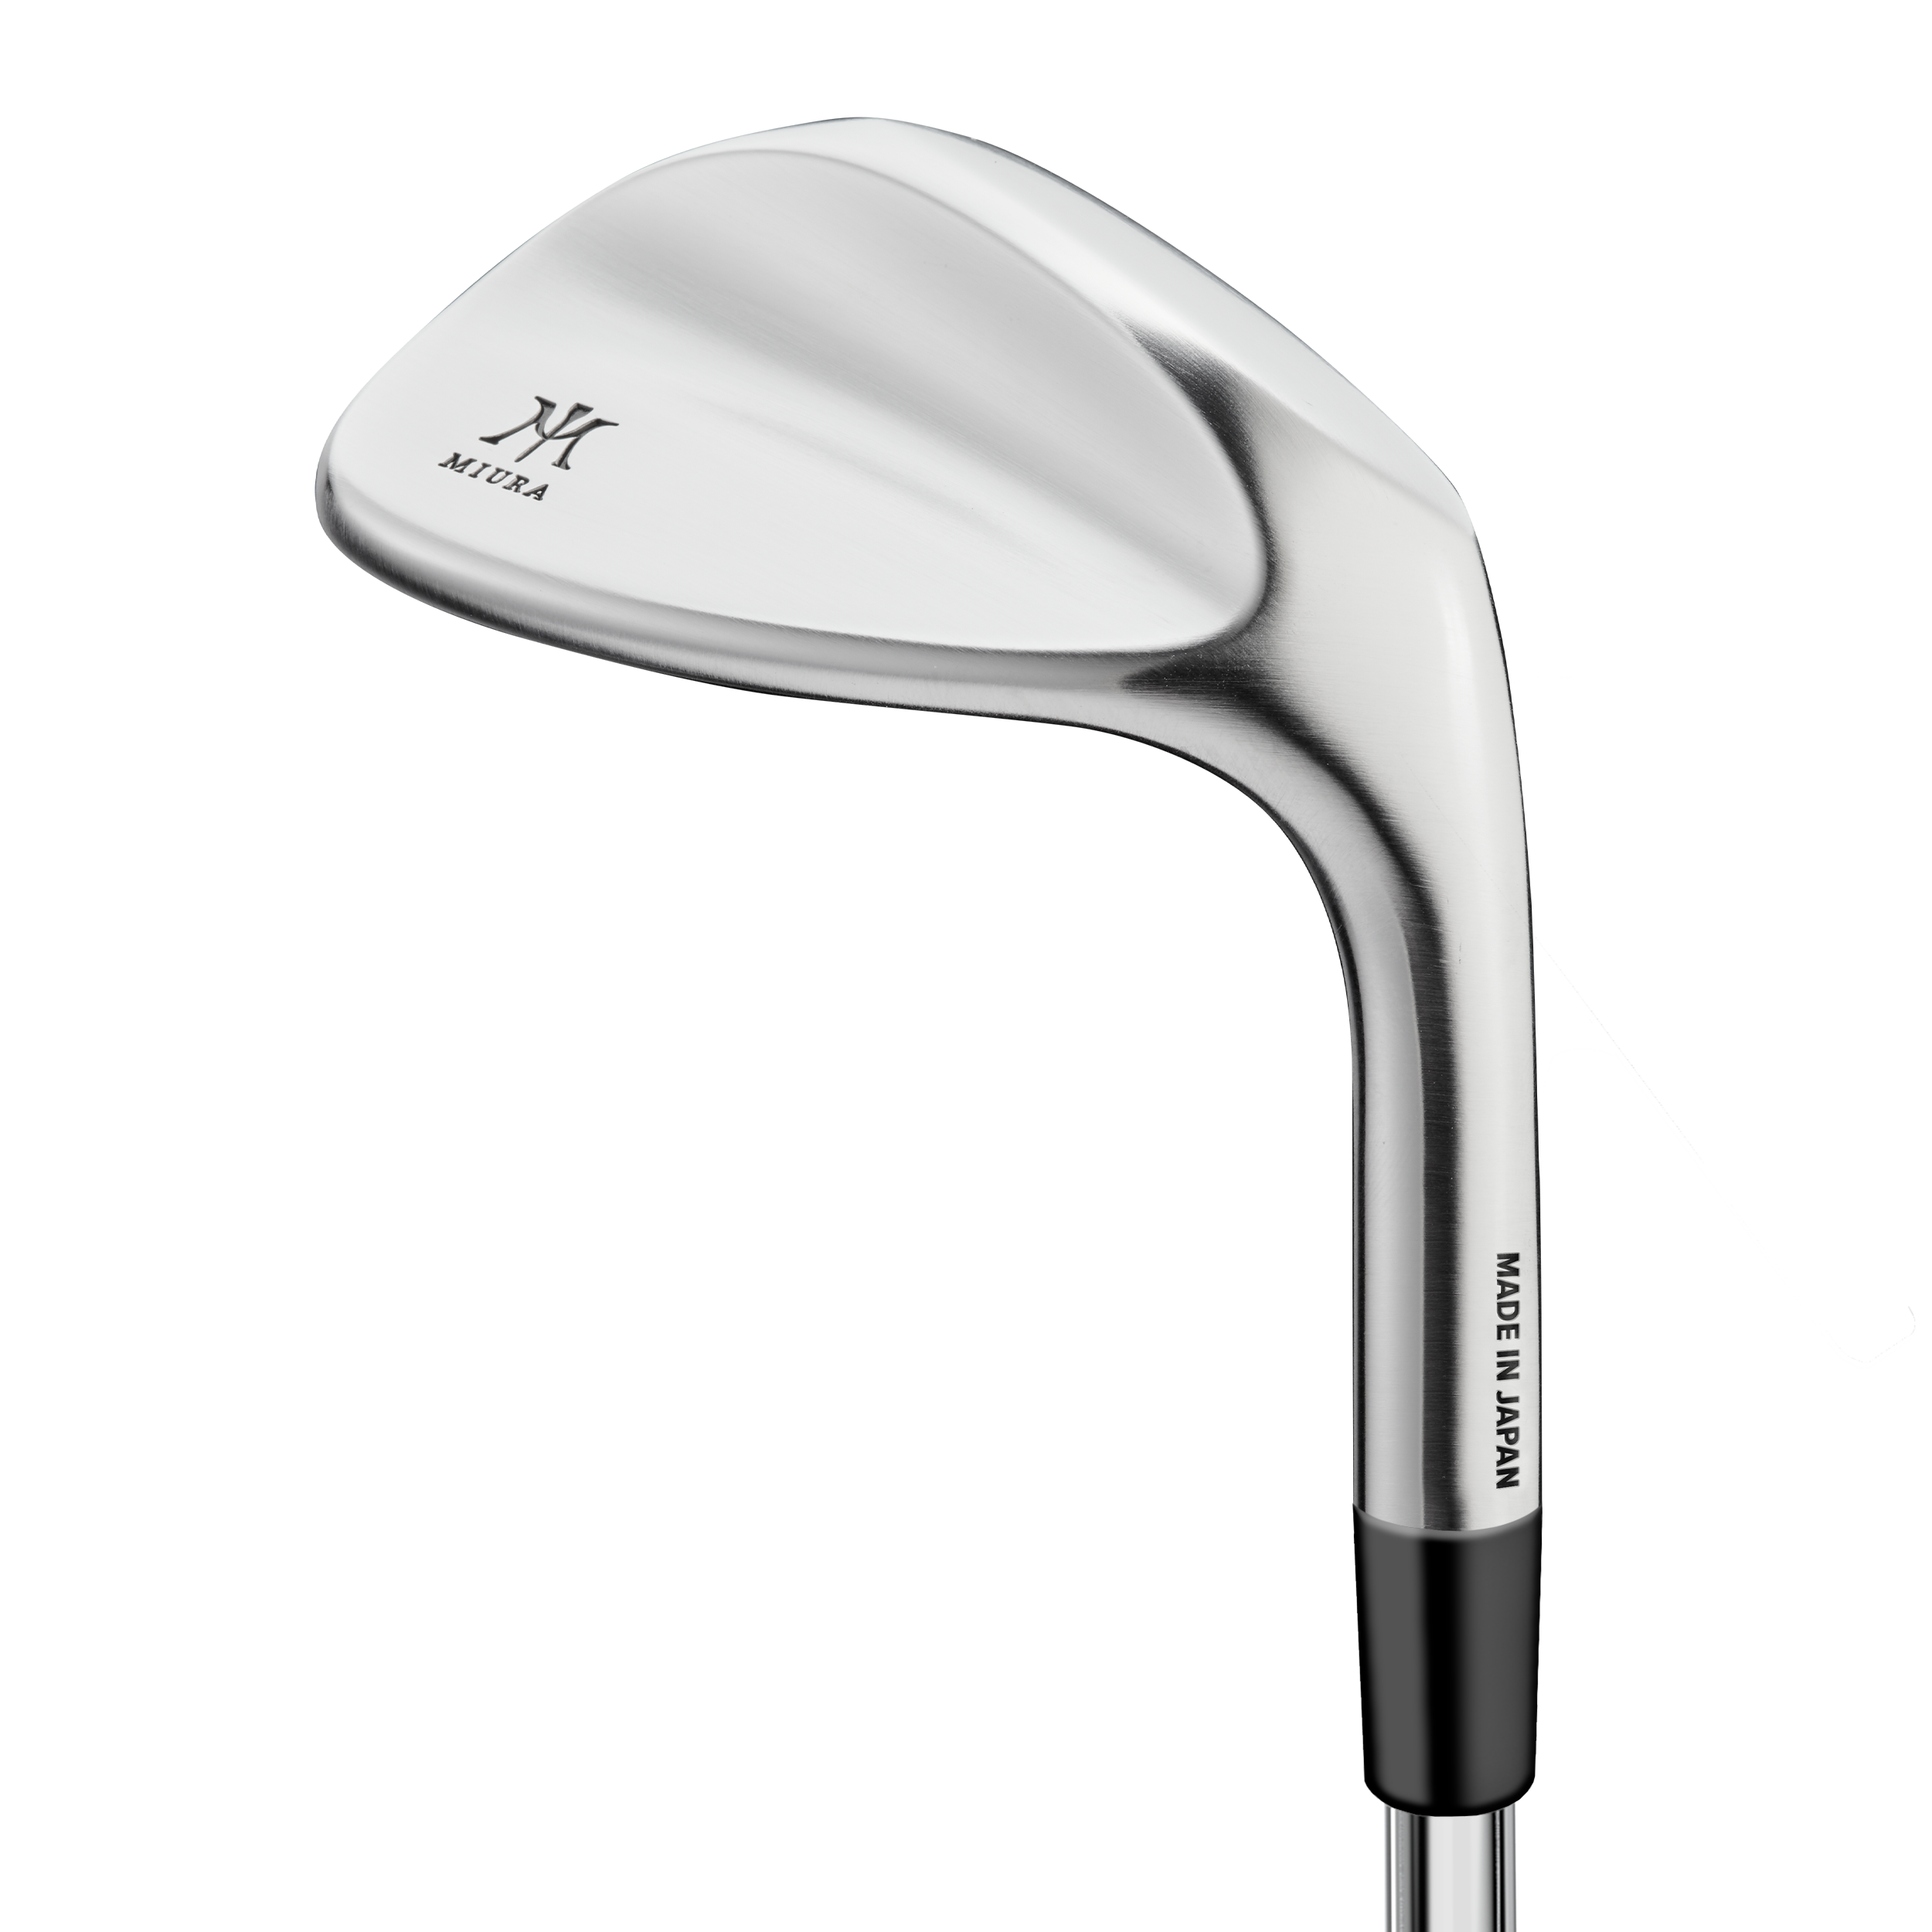 Milled Tour Wedge